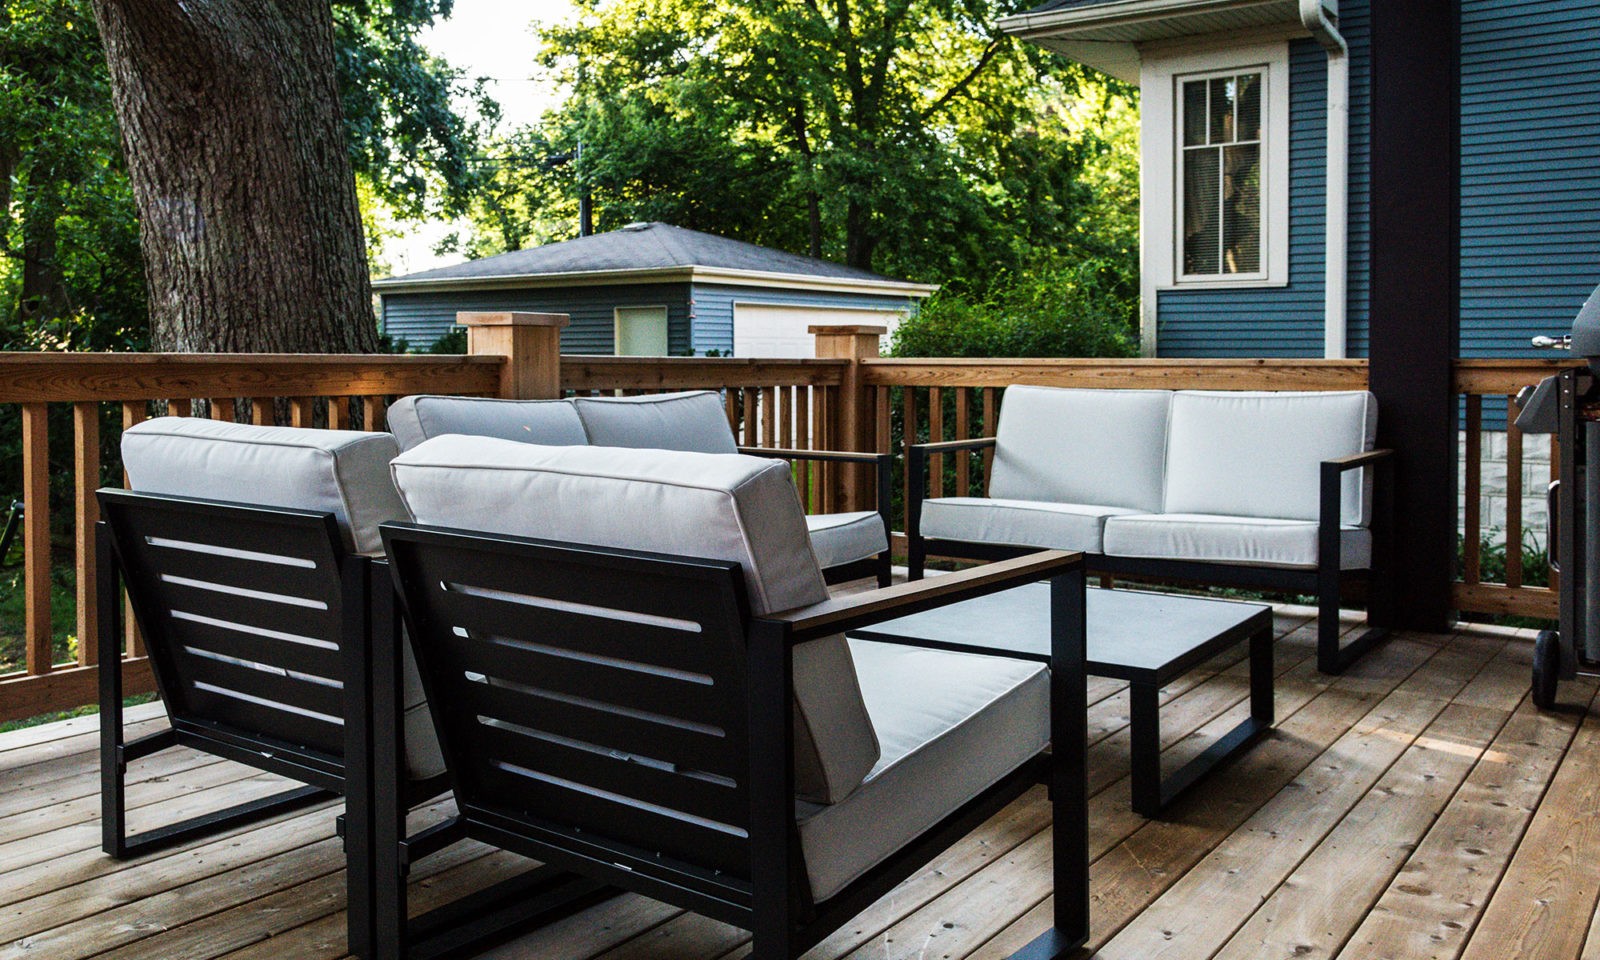 Renovated patio space with outdoor patio furniture